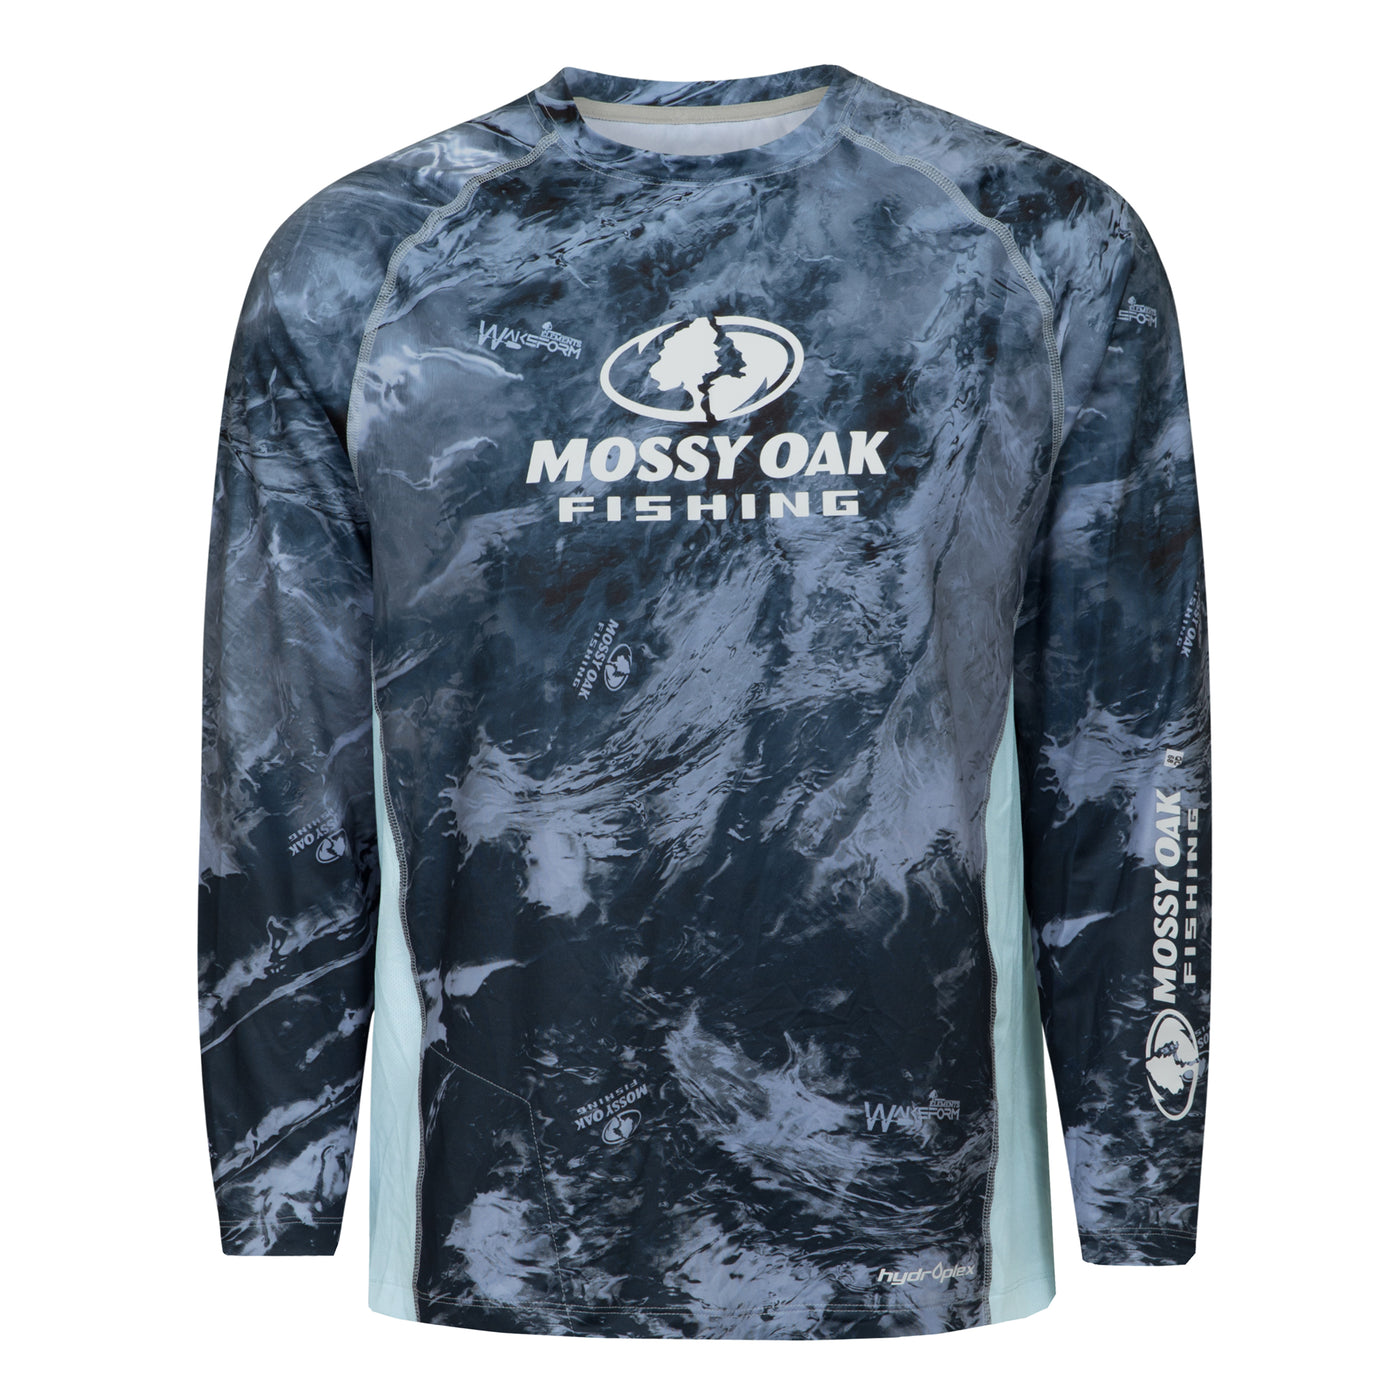 Mossy Oak Fishing, From backwaters to big waves, All New Mossy Oak Fishing  Apparel powered by Hydroplex is designed to keep you cool, comfortable and  protected from the sun.